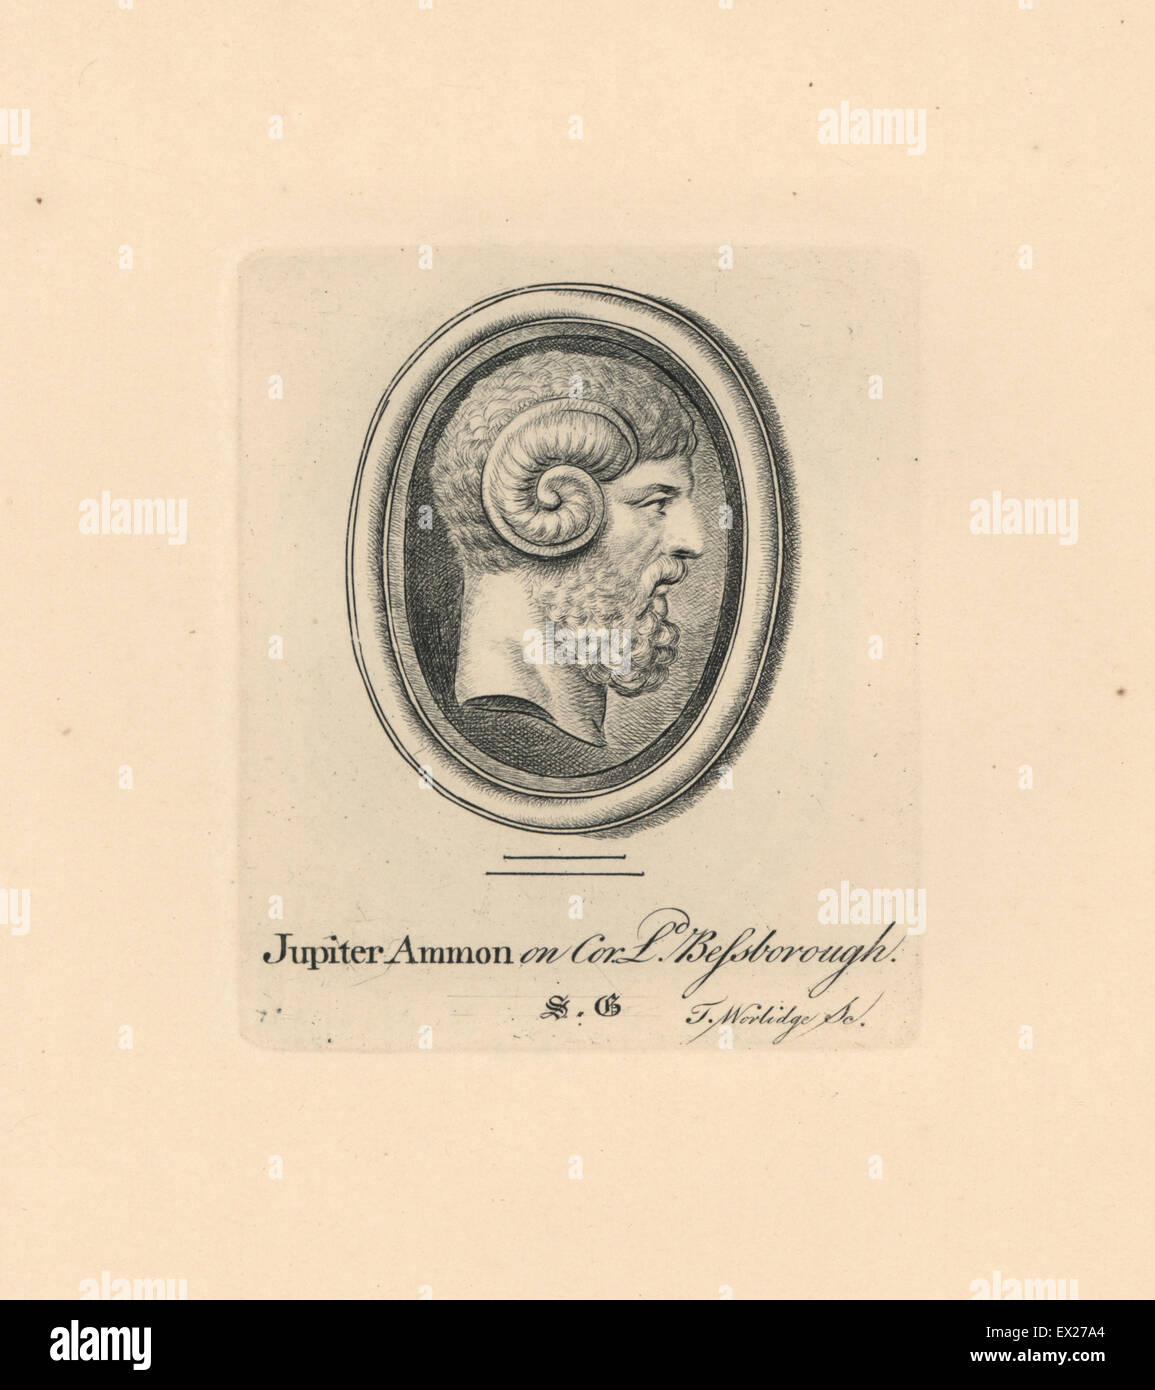 Portrait of Jupiter or Jove, Roman deity, with ram's horn of Ammon, on cornelian from the collection of Lord Bessborough. Copperplate engraving by Thomas Worlidge from James Vallentin's One Hundred and Eight Engravings from Antique Gems, 1863. Stock Photo